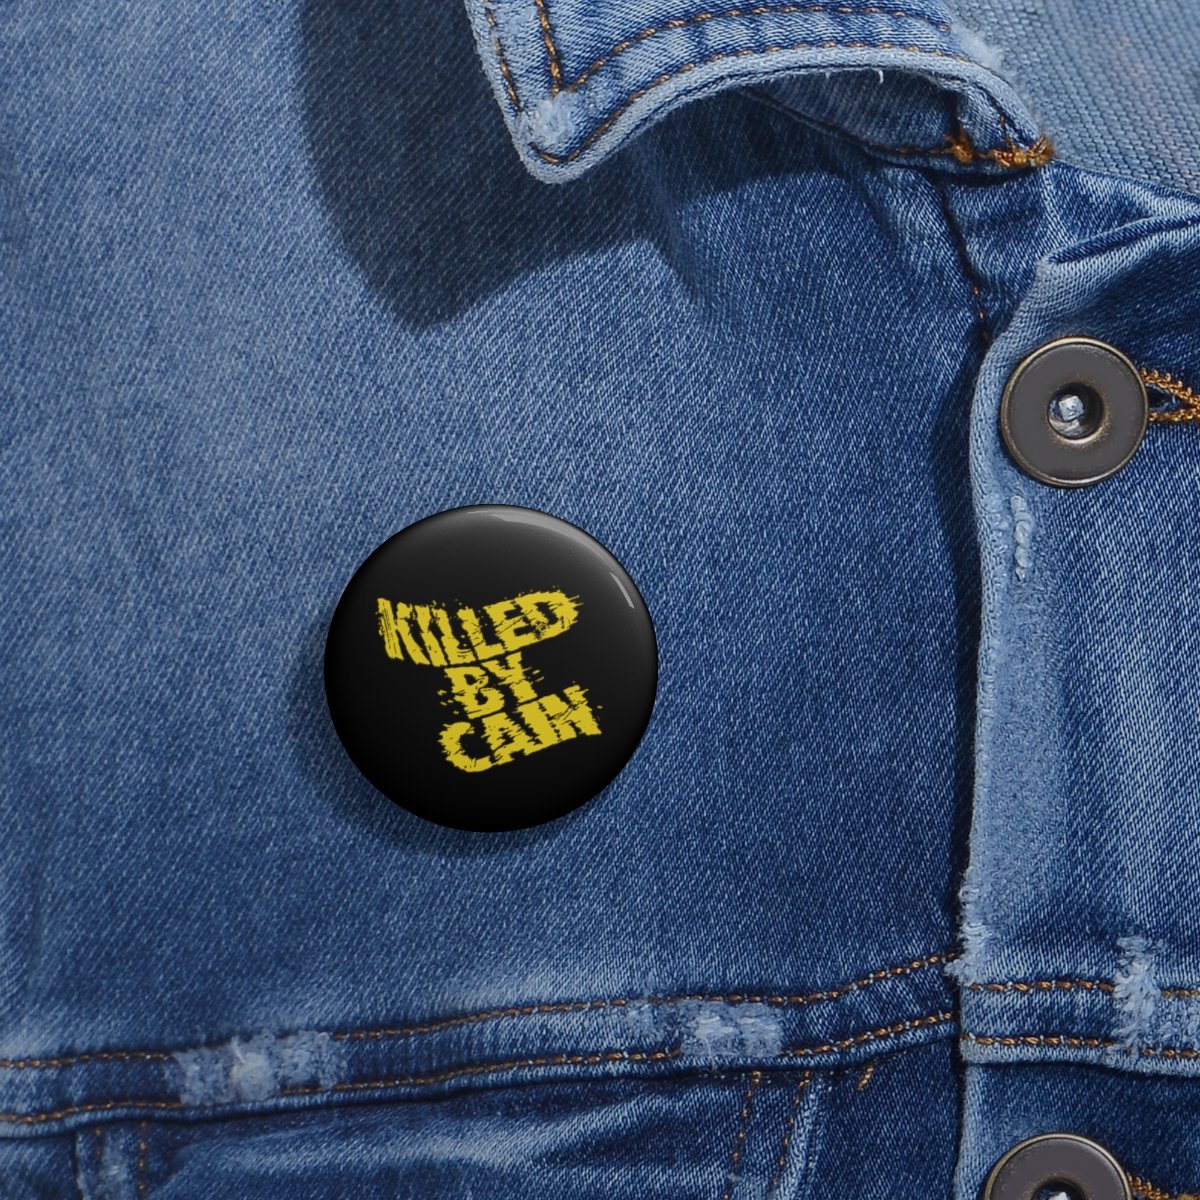 Killed By Cain Logo Pin Buttons